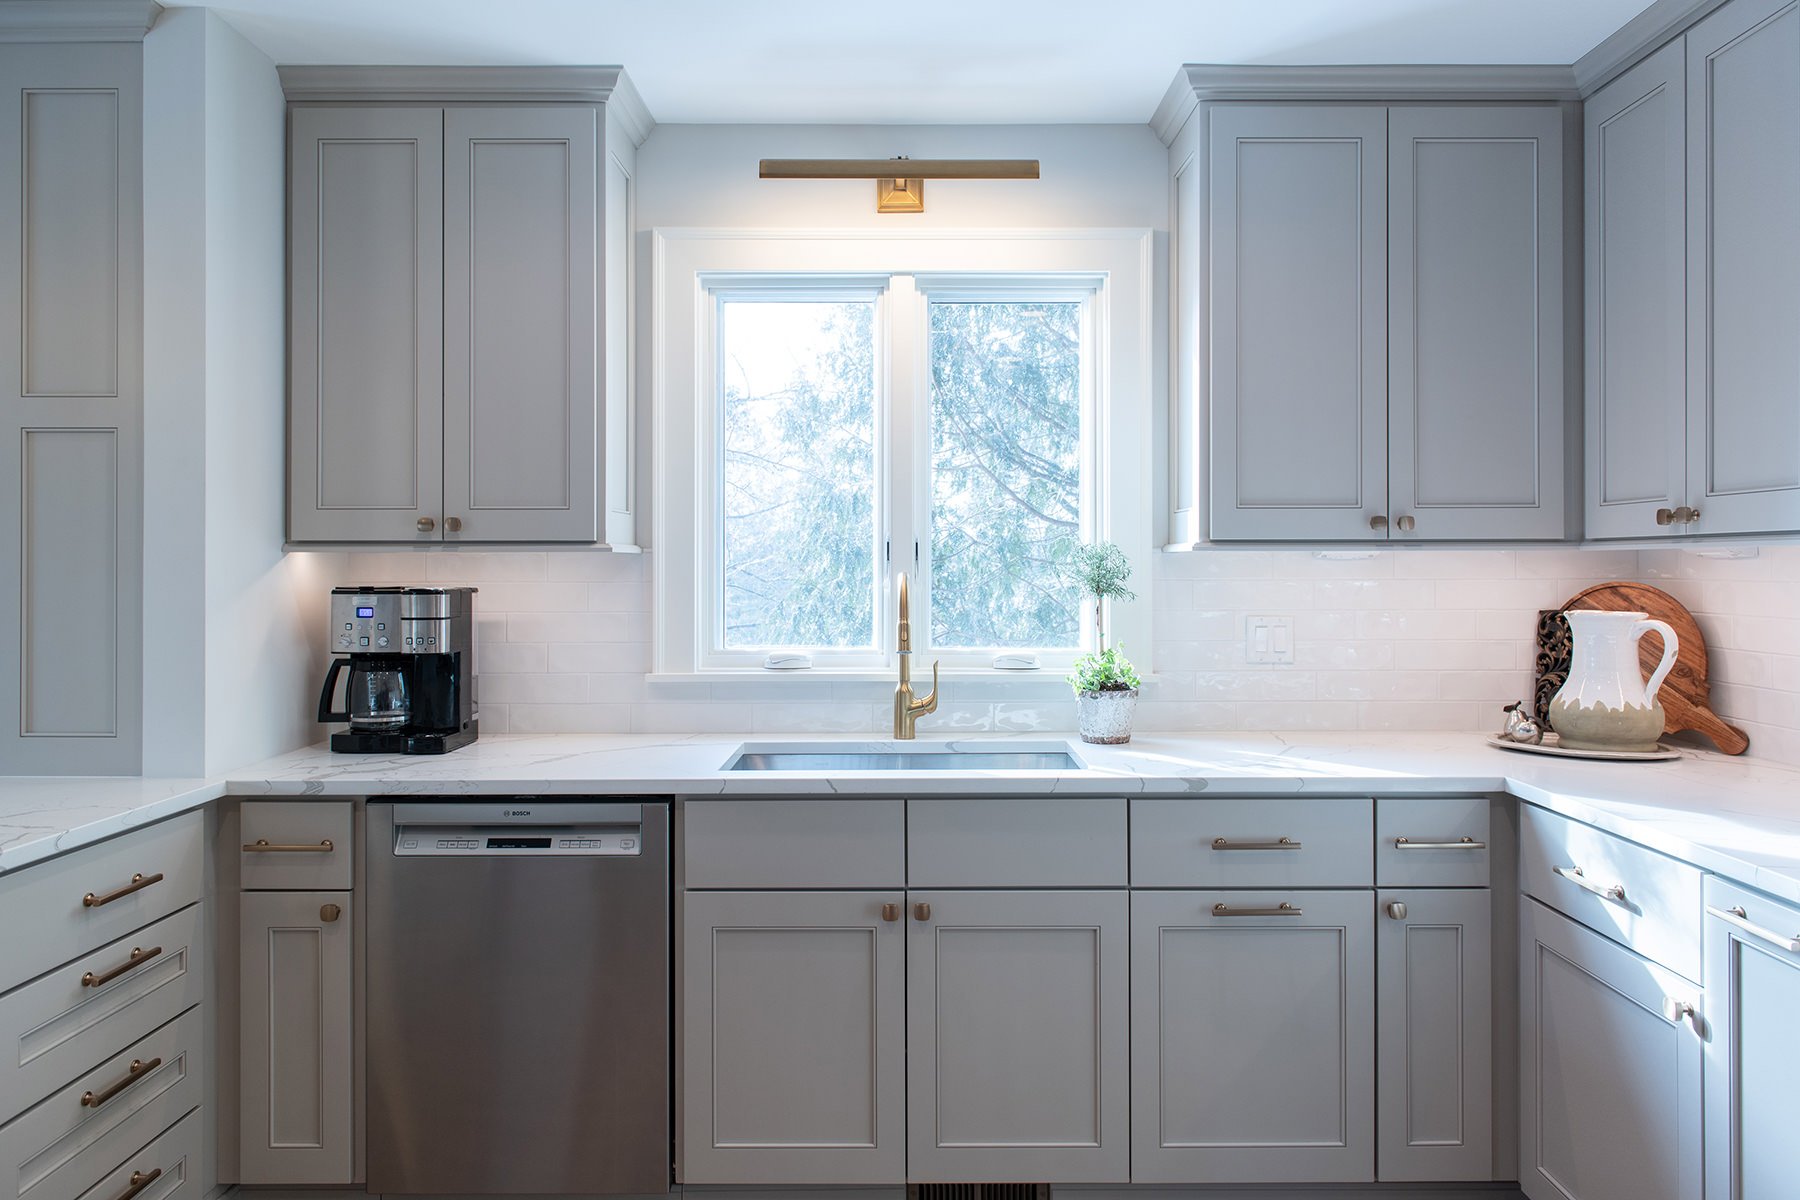 Kitchen renovation with gray painted cabinets, gold hardware, white marble countertops and a backsplash with white subway tile.